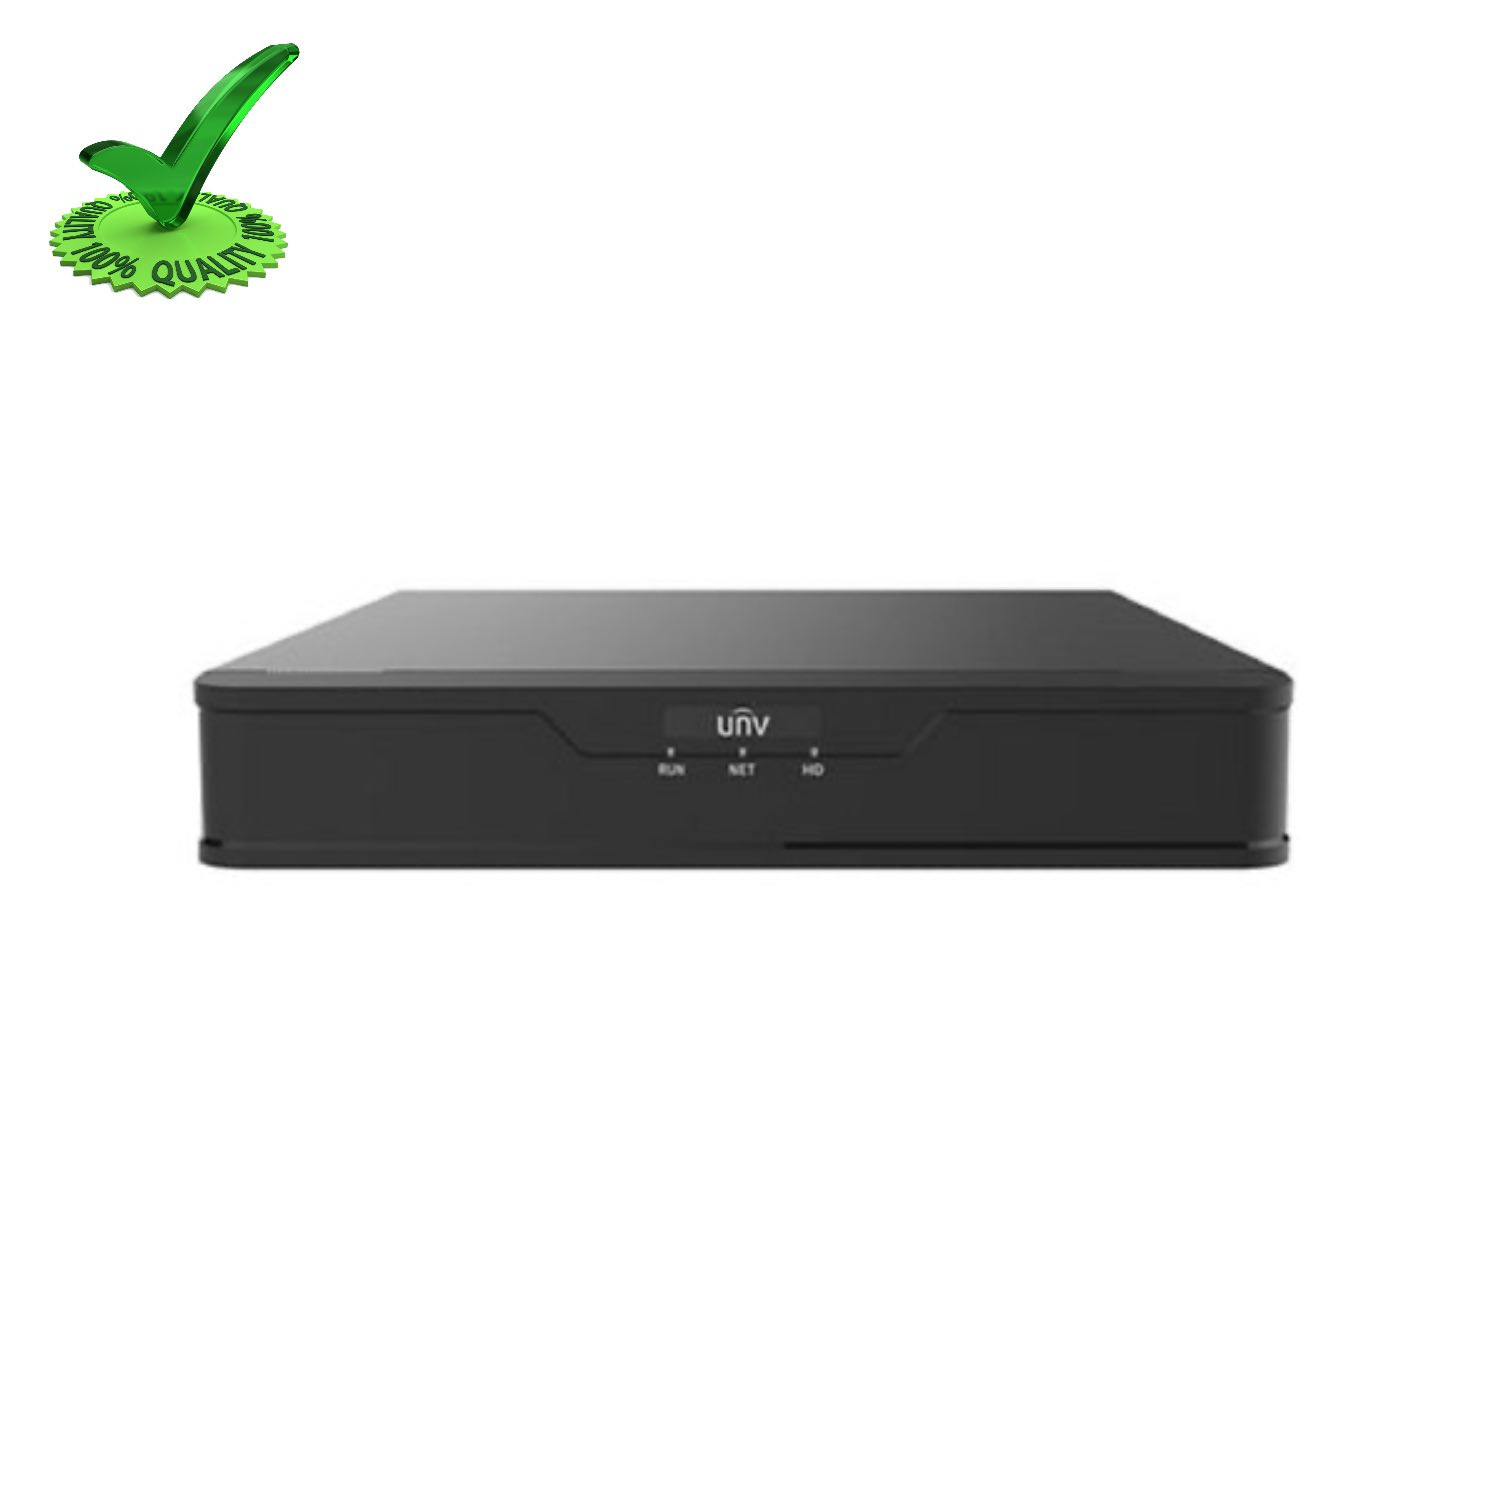 Uniview NVR301-16S3 16Ch HD Network Video Recorder